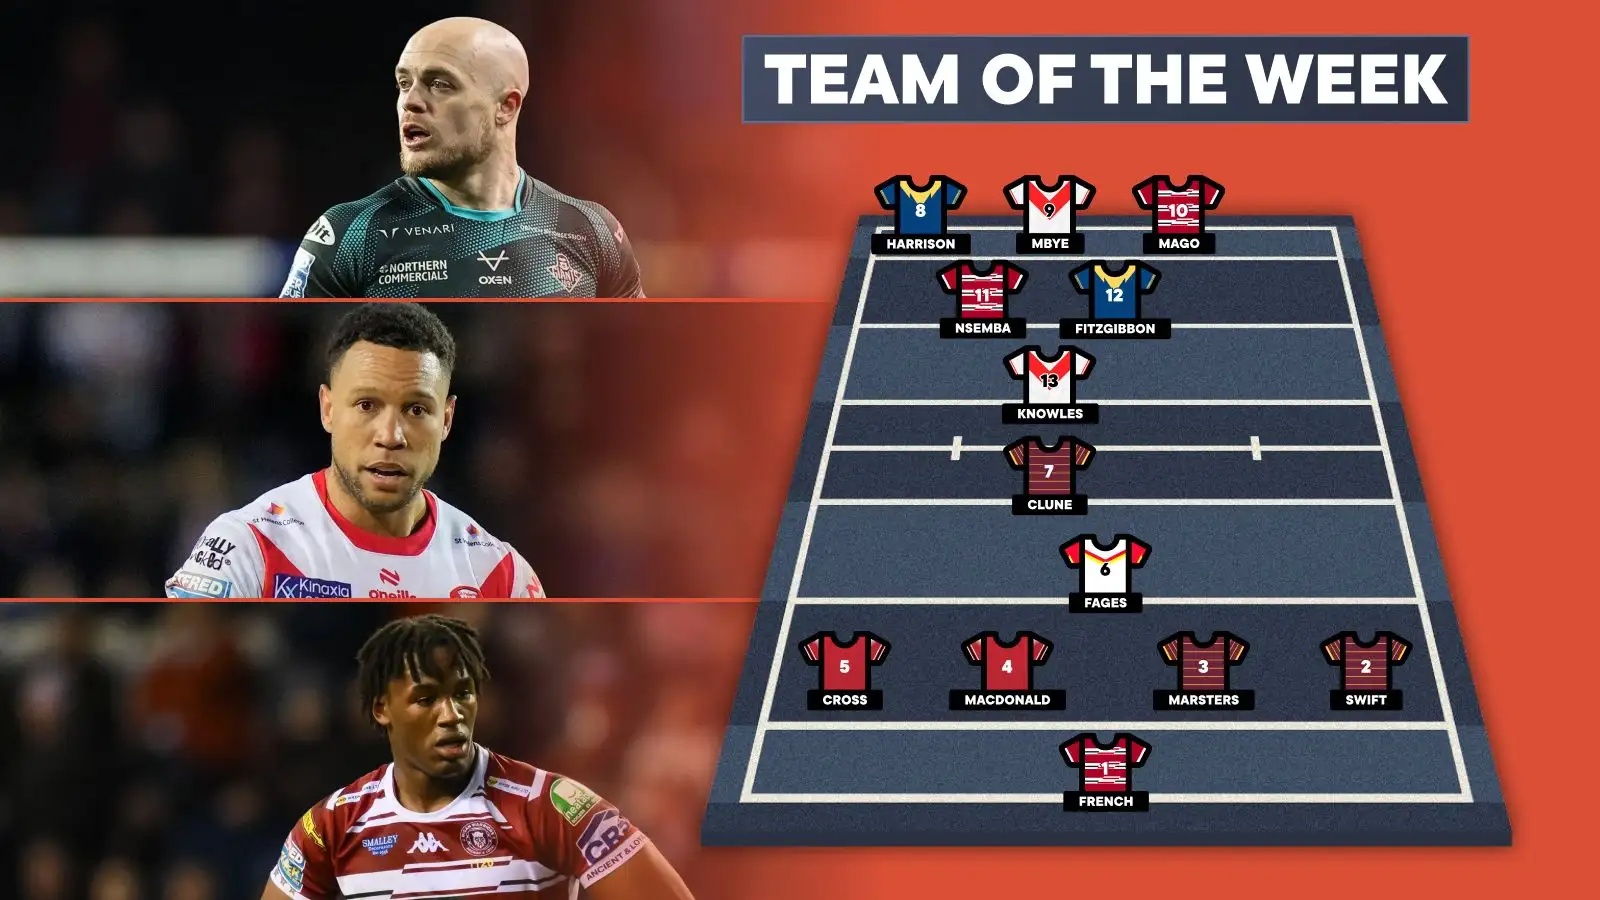 Wigan Warriors, Huddersfield Giants provide 6 players in Super League Team of the Week